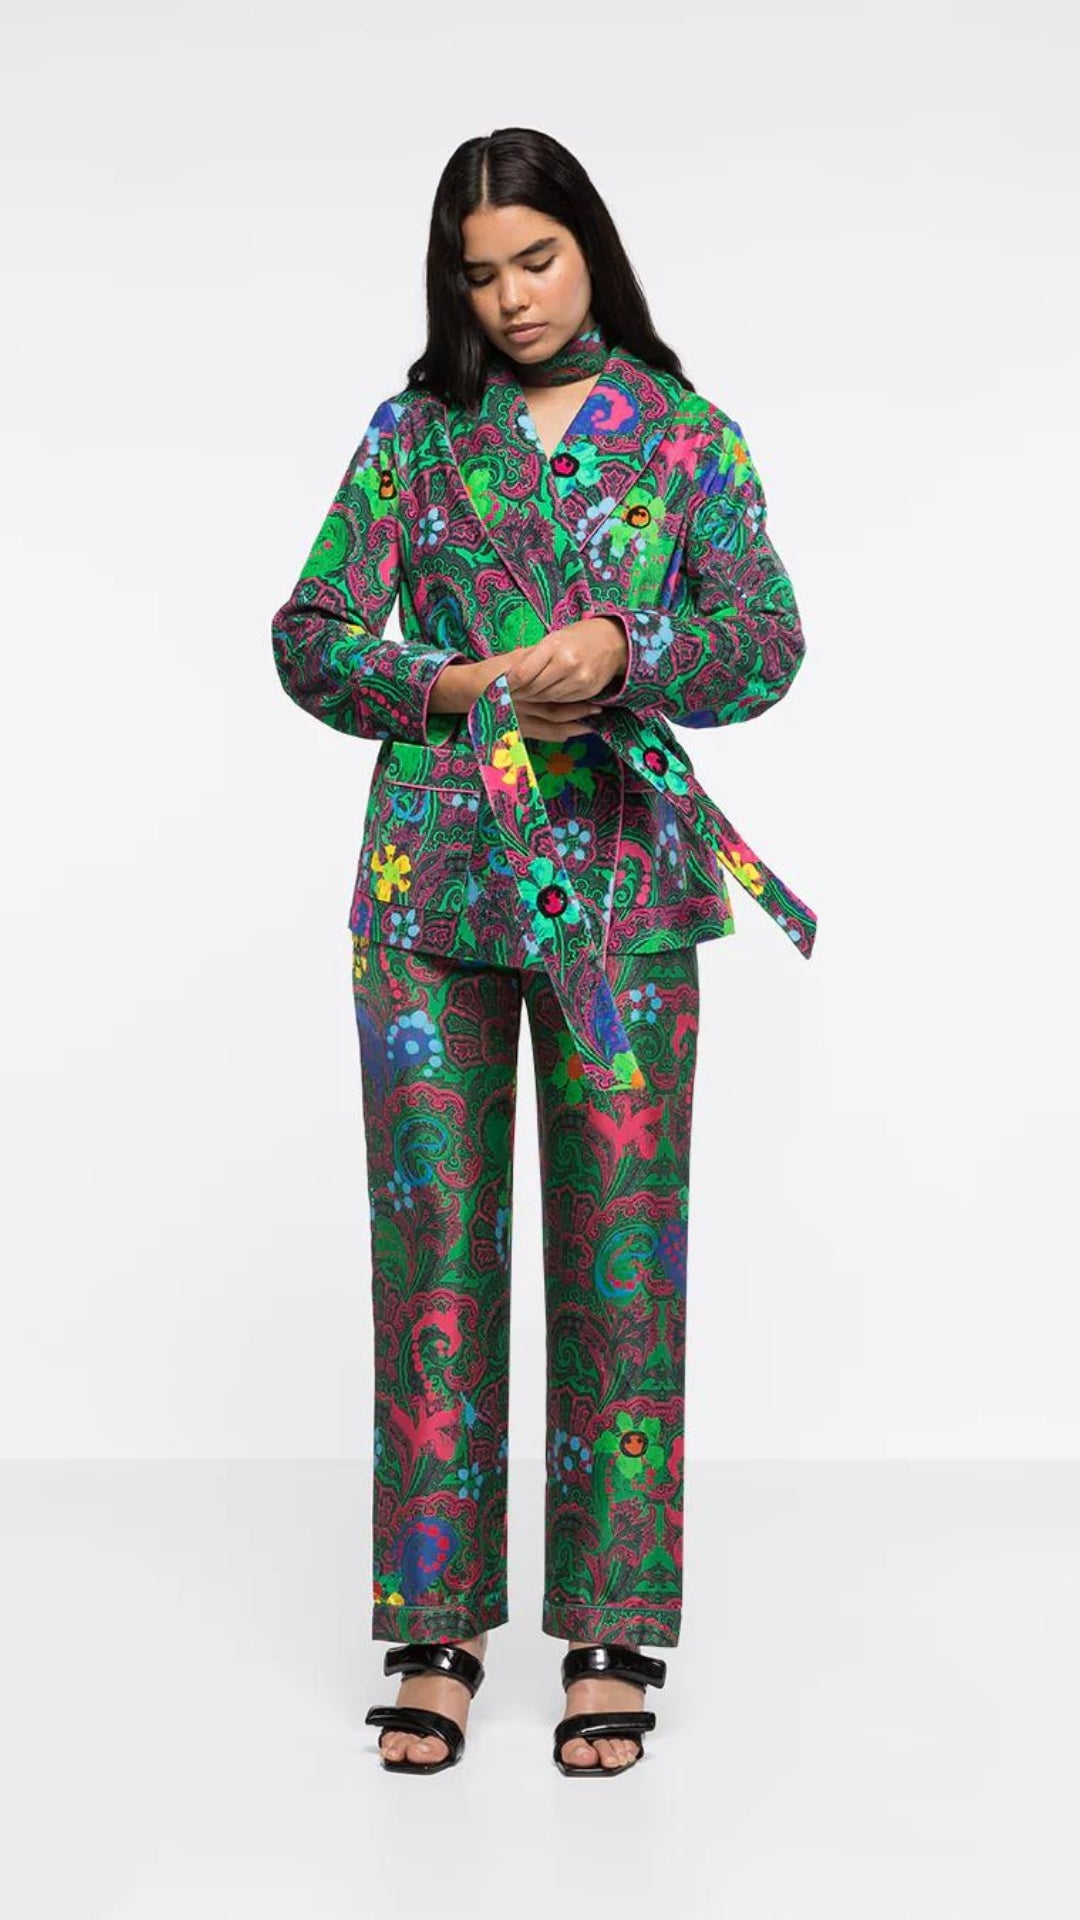 AZ Factory Shawl Collar Jacket in Motly Paisley. This lightweight, belted jacket boasts an all-over printed velvet fabric, tie belt, front patch pockets, butterfly lining, and piping details for an extra touch of elegance. Shown on model facing front.